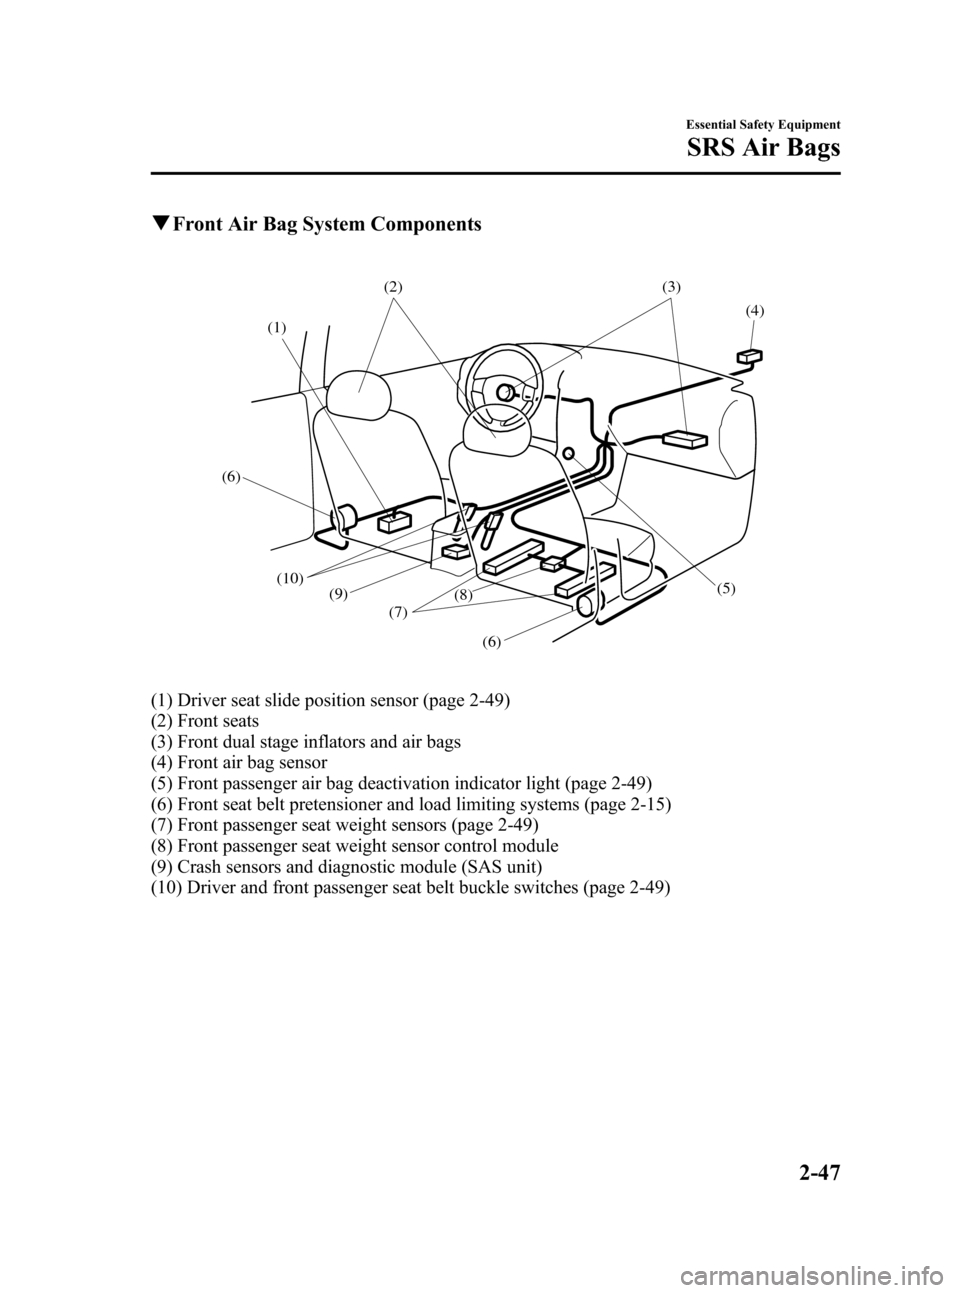 MAZDA MODEL 3 HATCHBACK 2007   (in English) Repair Manual Black plate (61,1)
qFront Air Bag System Components
(1)
(6)
(10)
(7)
(6) (9)(5)(4) (3) (2)
(8)
(1) Driver seat slide position sensor (page 2-49)
(2) Front seats
(3) Front dual stage inflators and air 